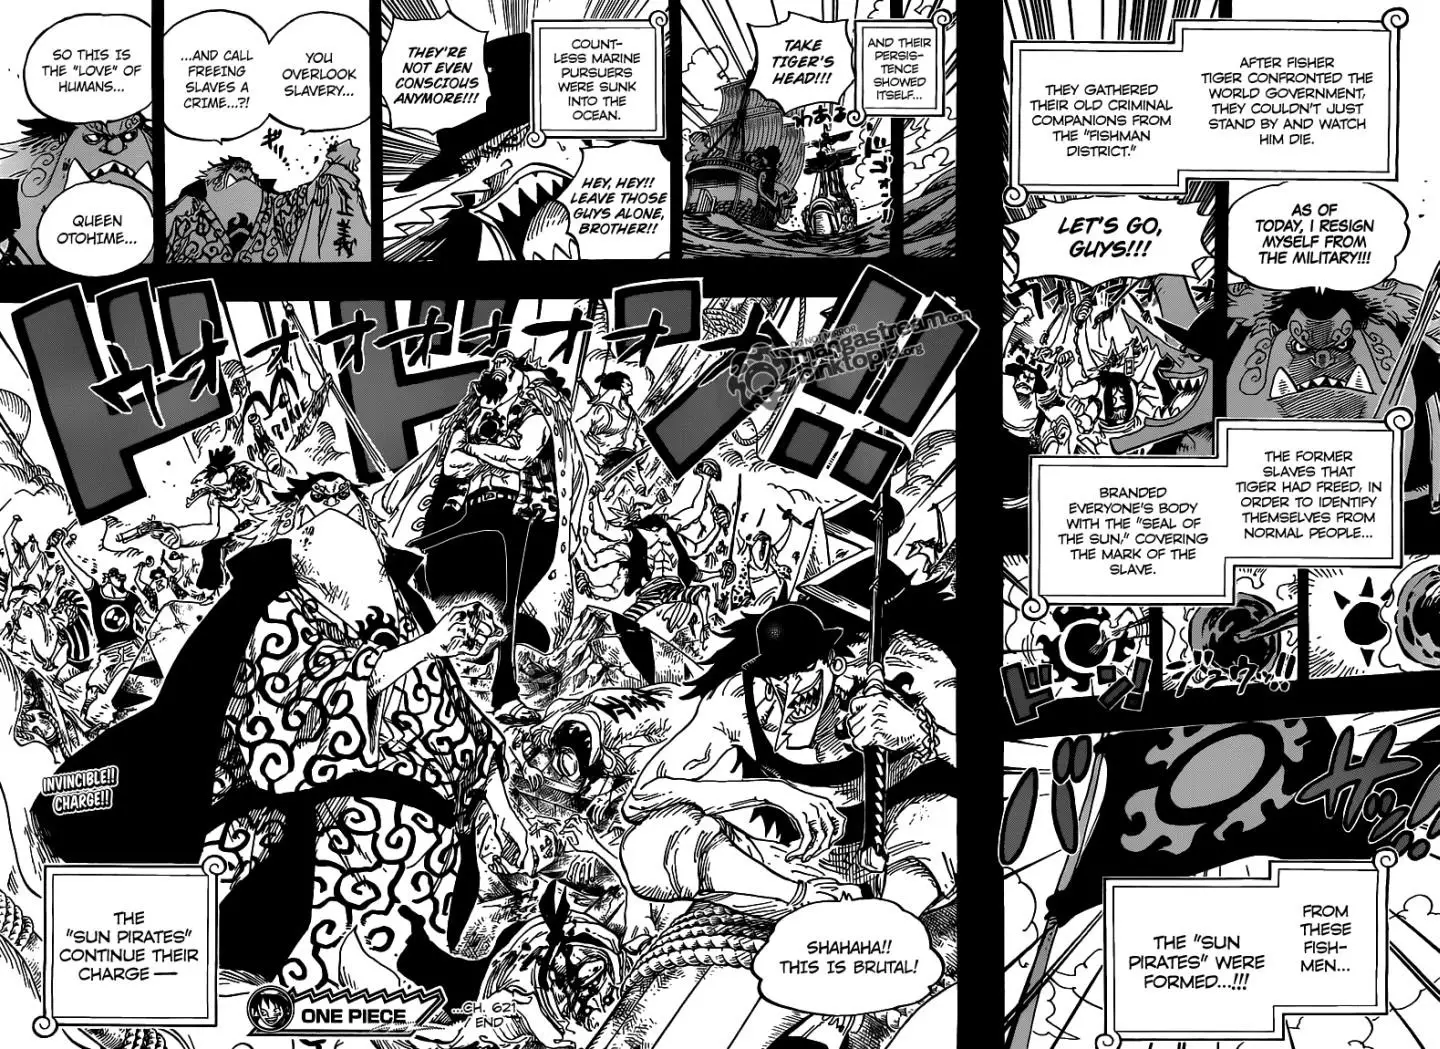 One Piece - 621 page p_00016